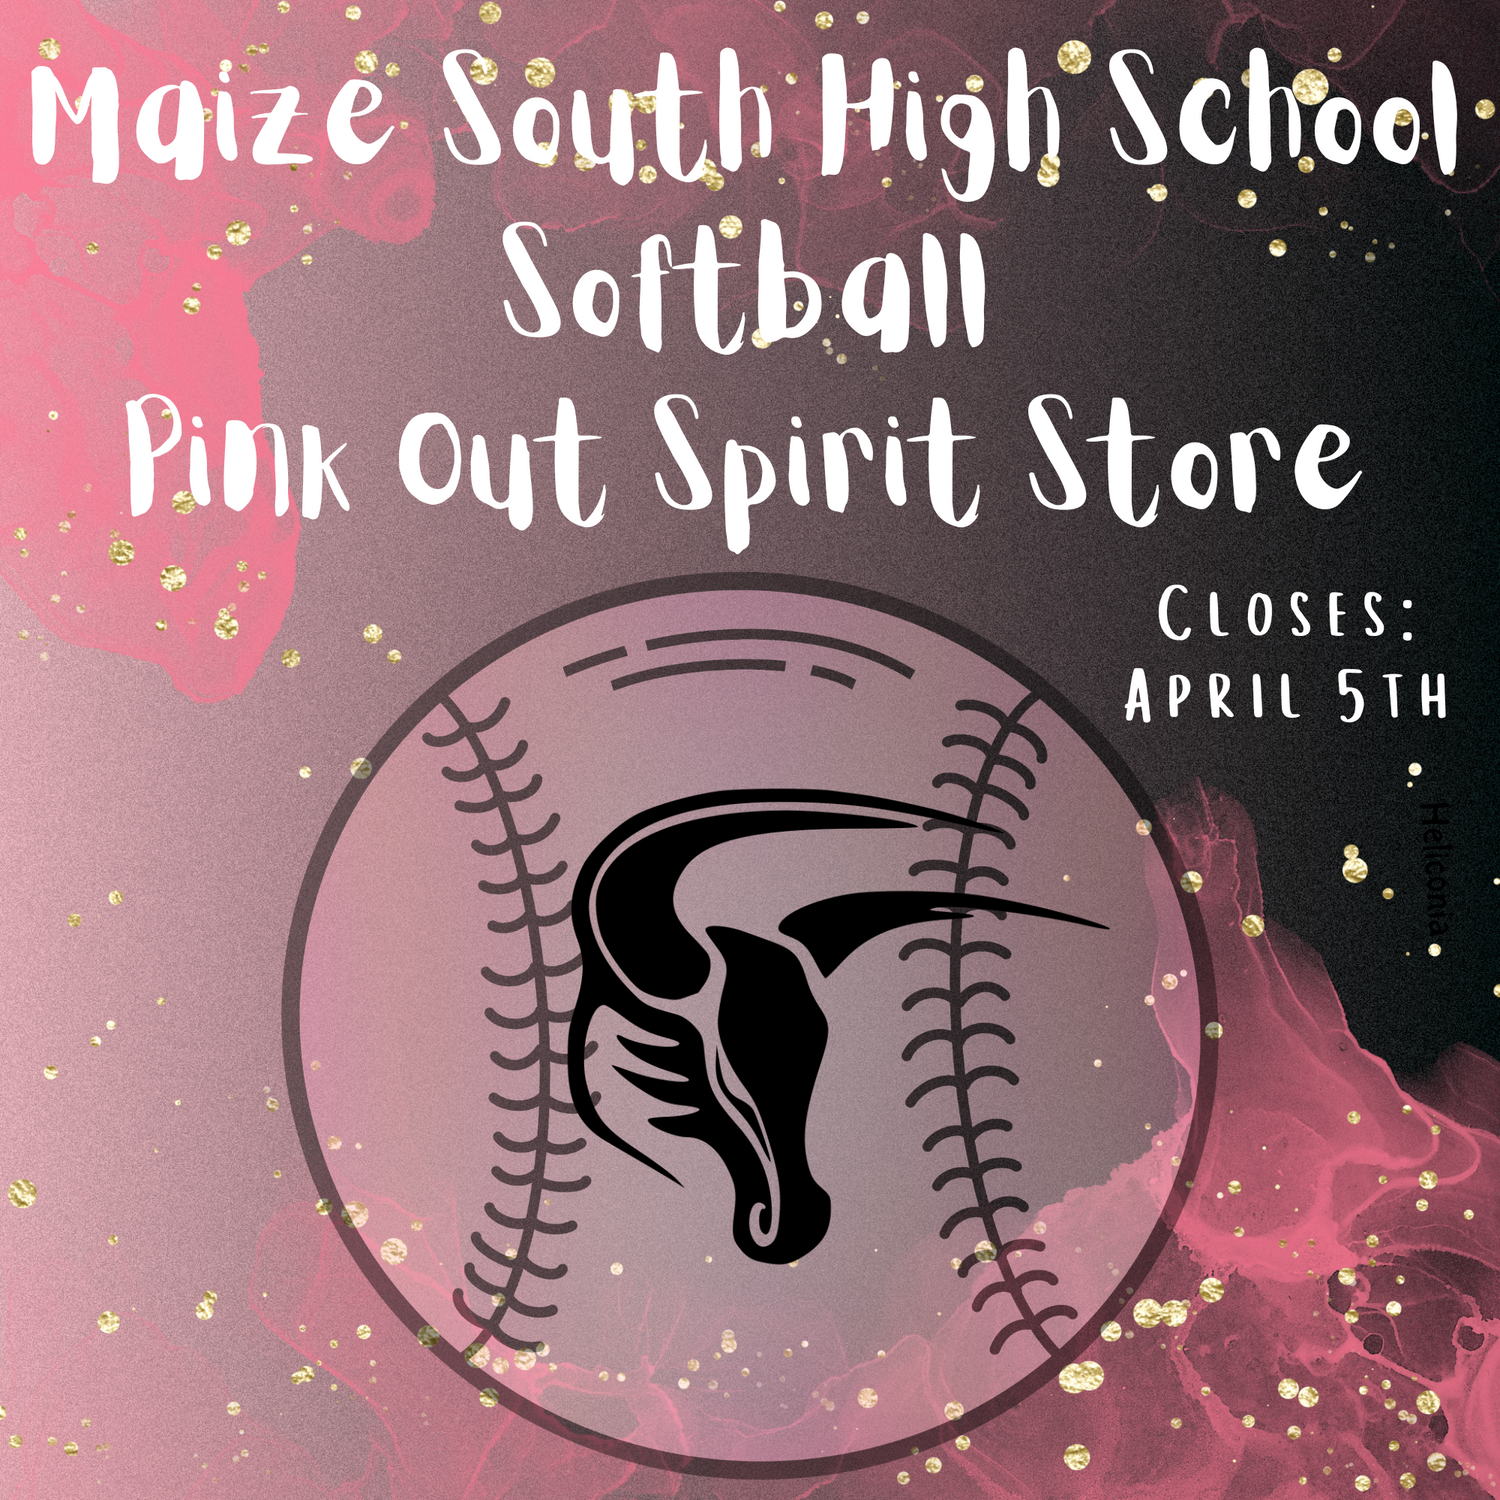 Maize South High School Softball Pink Out